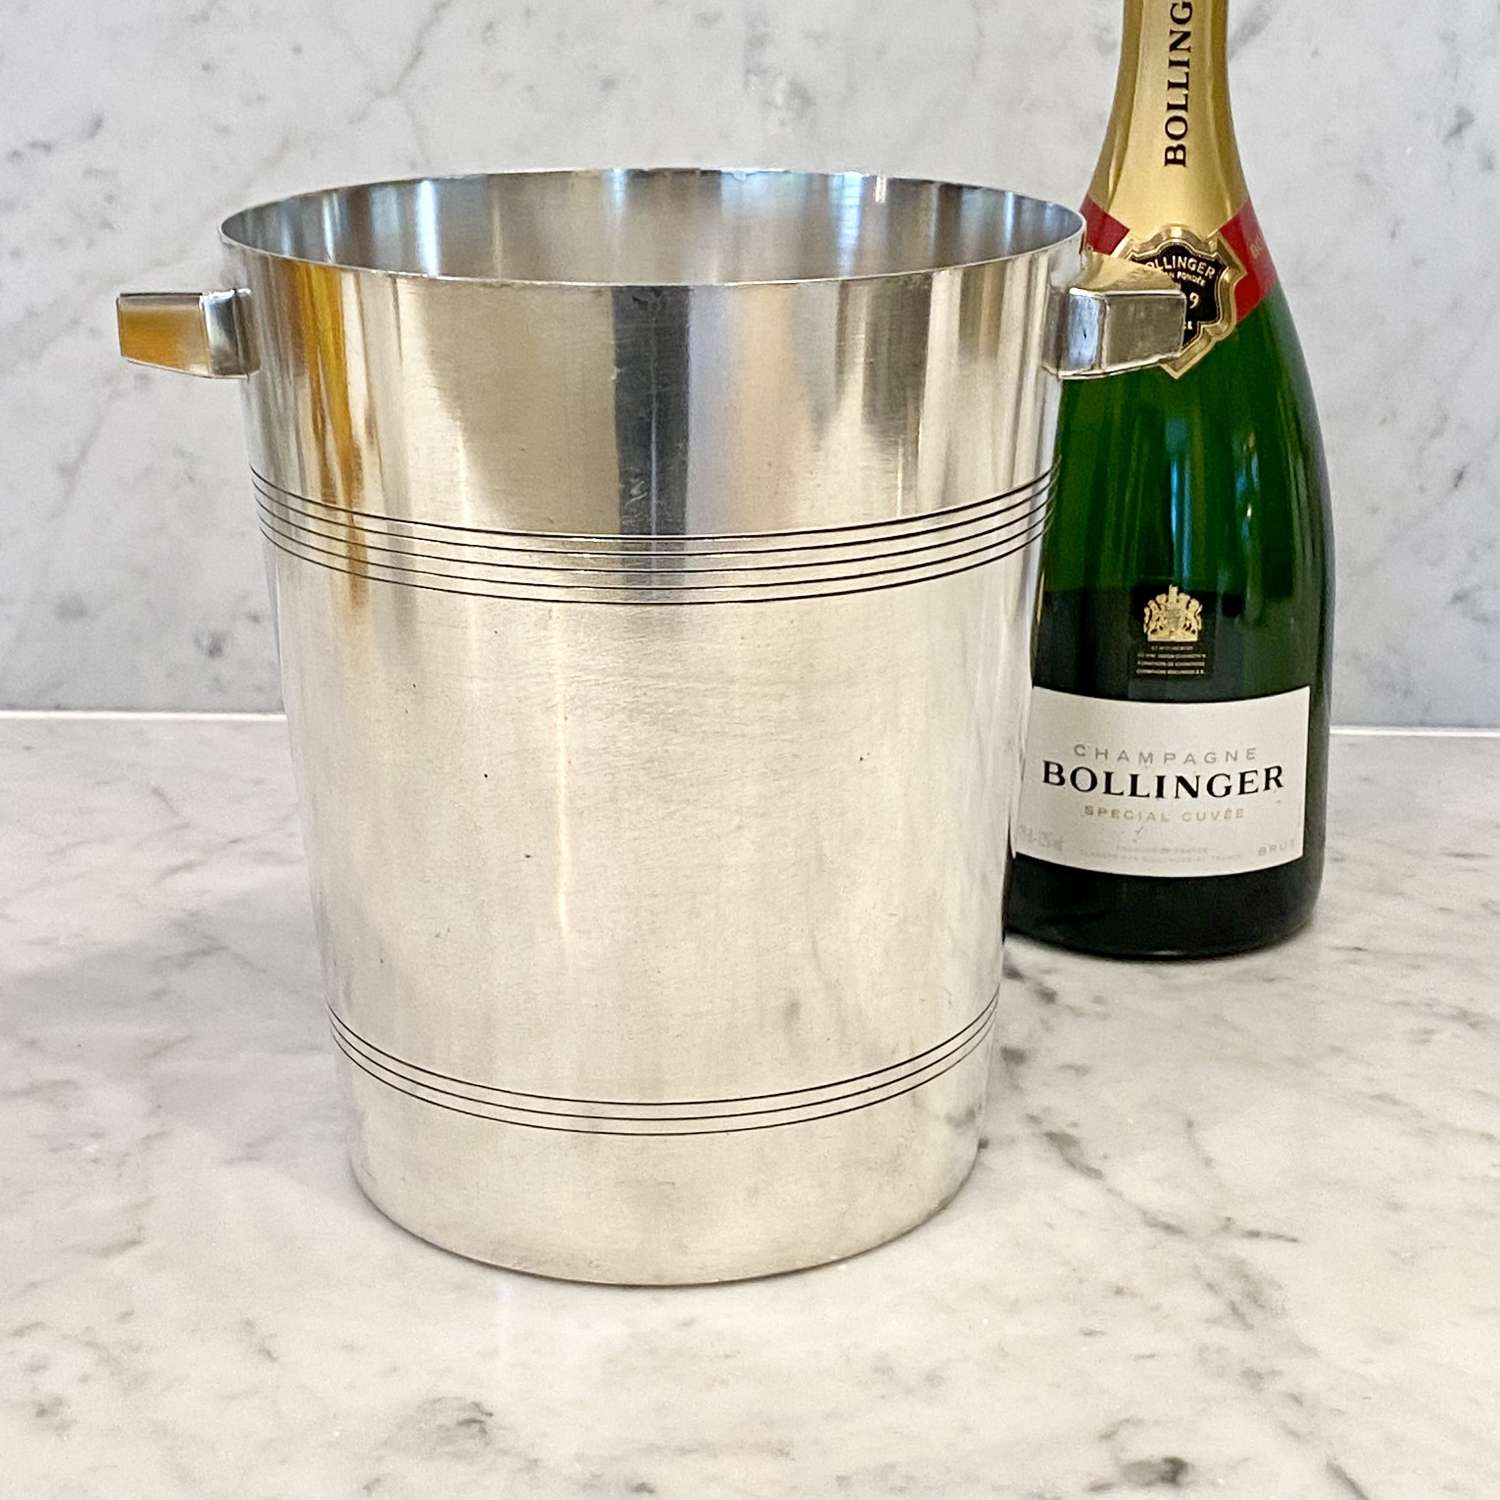 Wiskemann silver plated champagne bucket or cooler